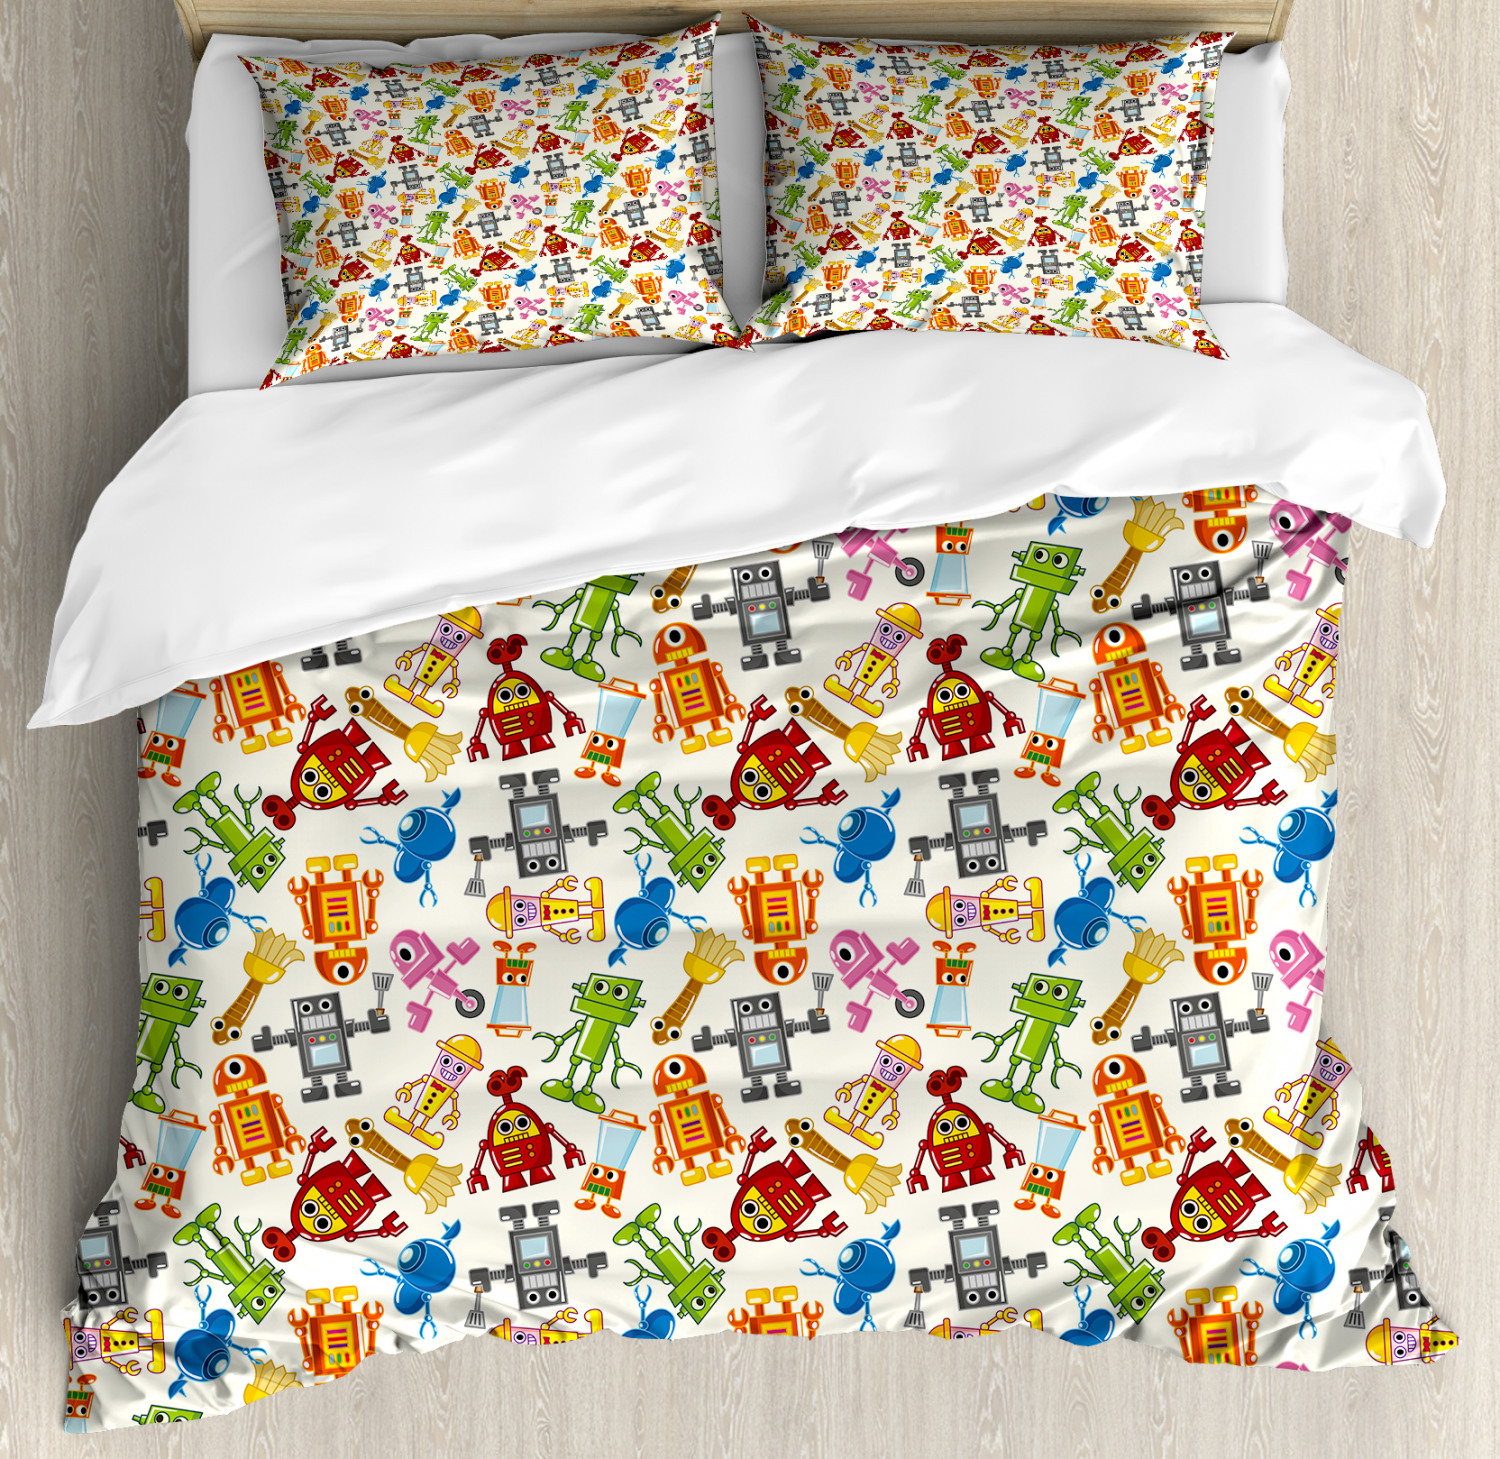 Vintage Kids Duvet Cover Set Twin Queen King Sizes With Pillow